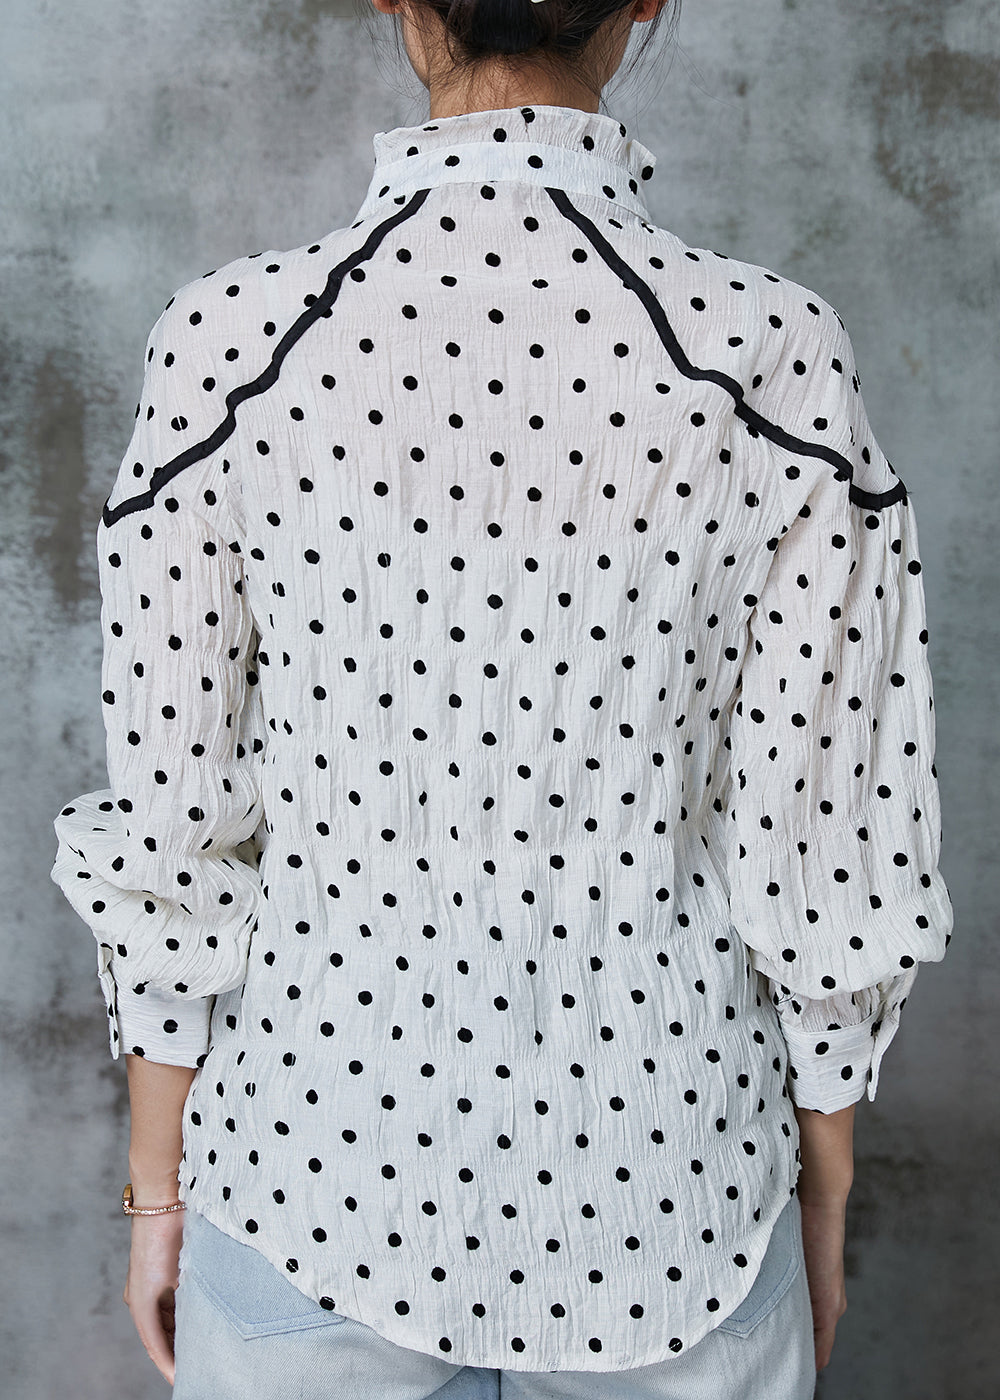 French White Stand Collar Dot Cotton Shirt Tops Spring